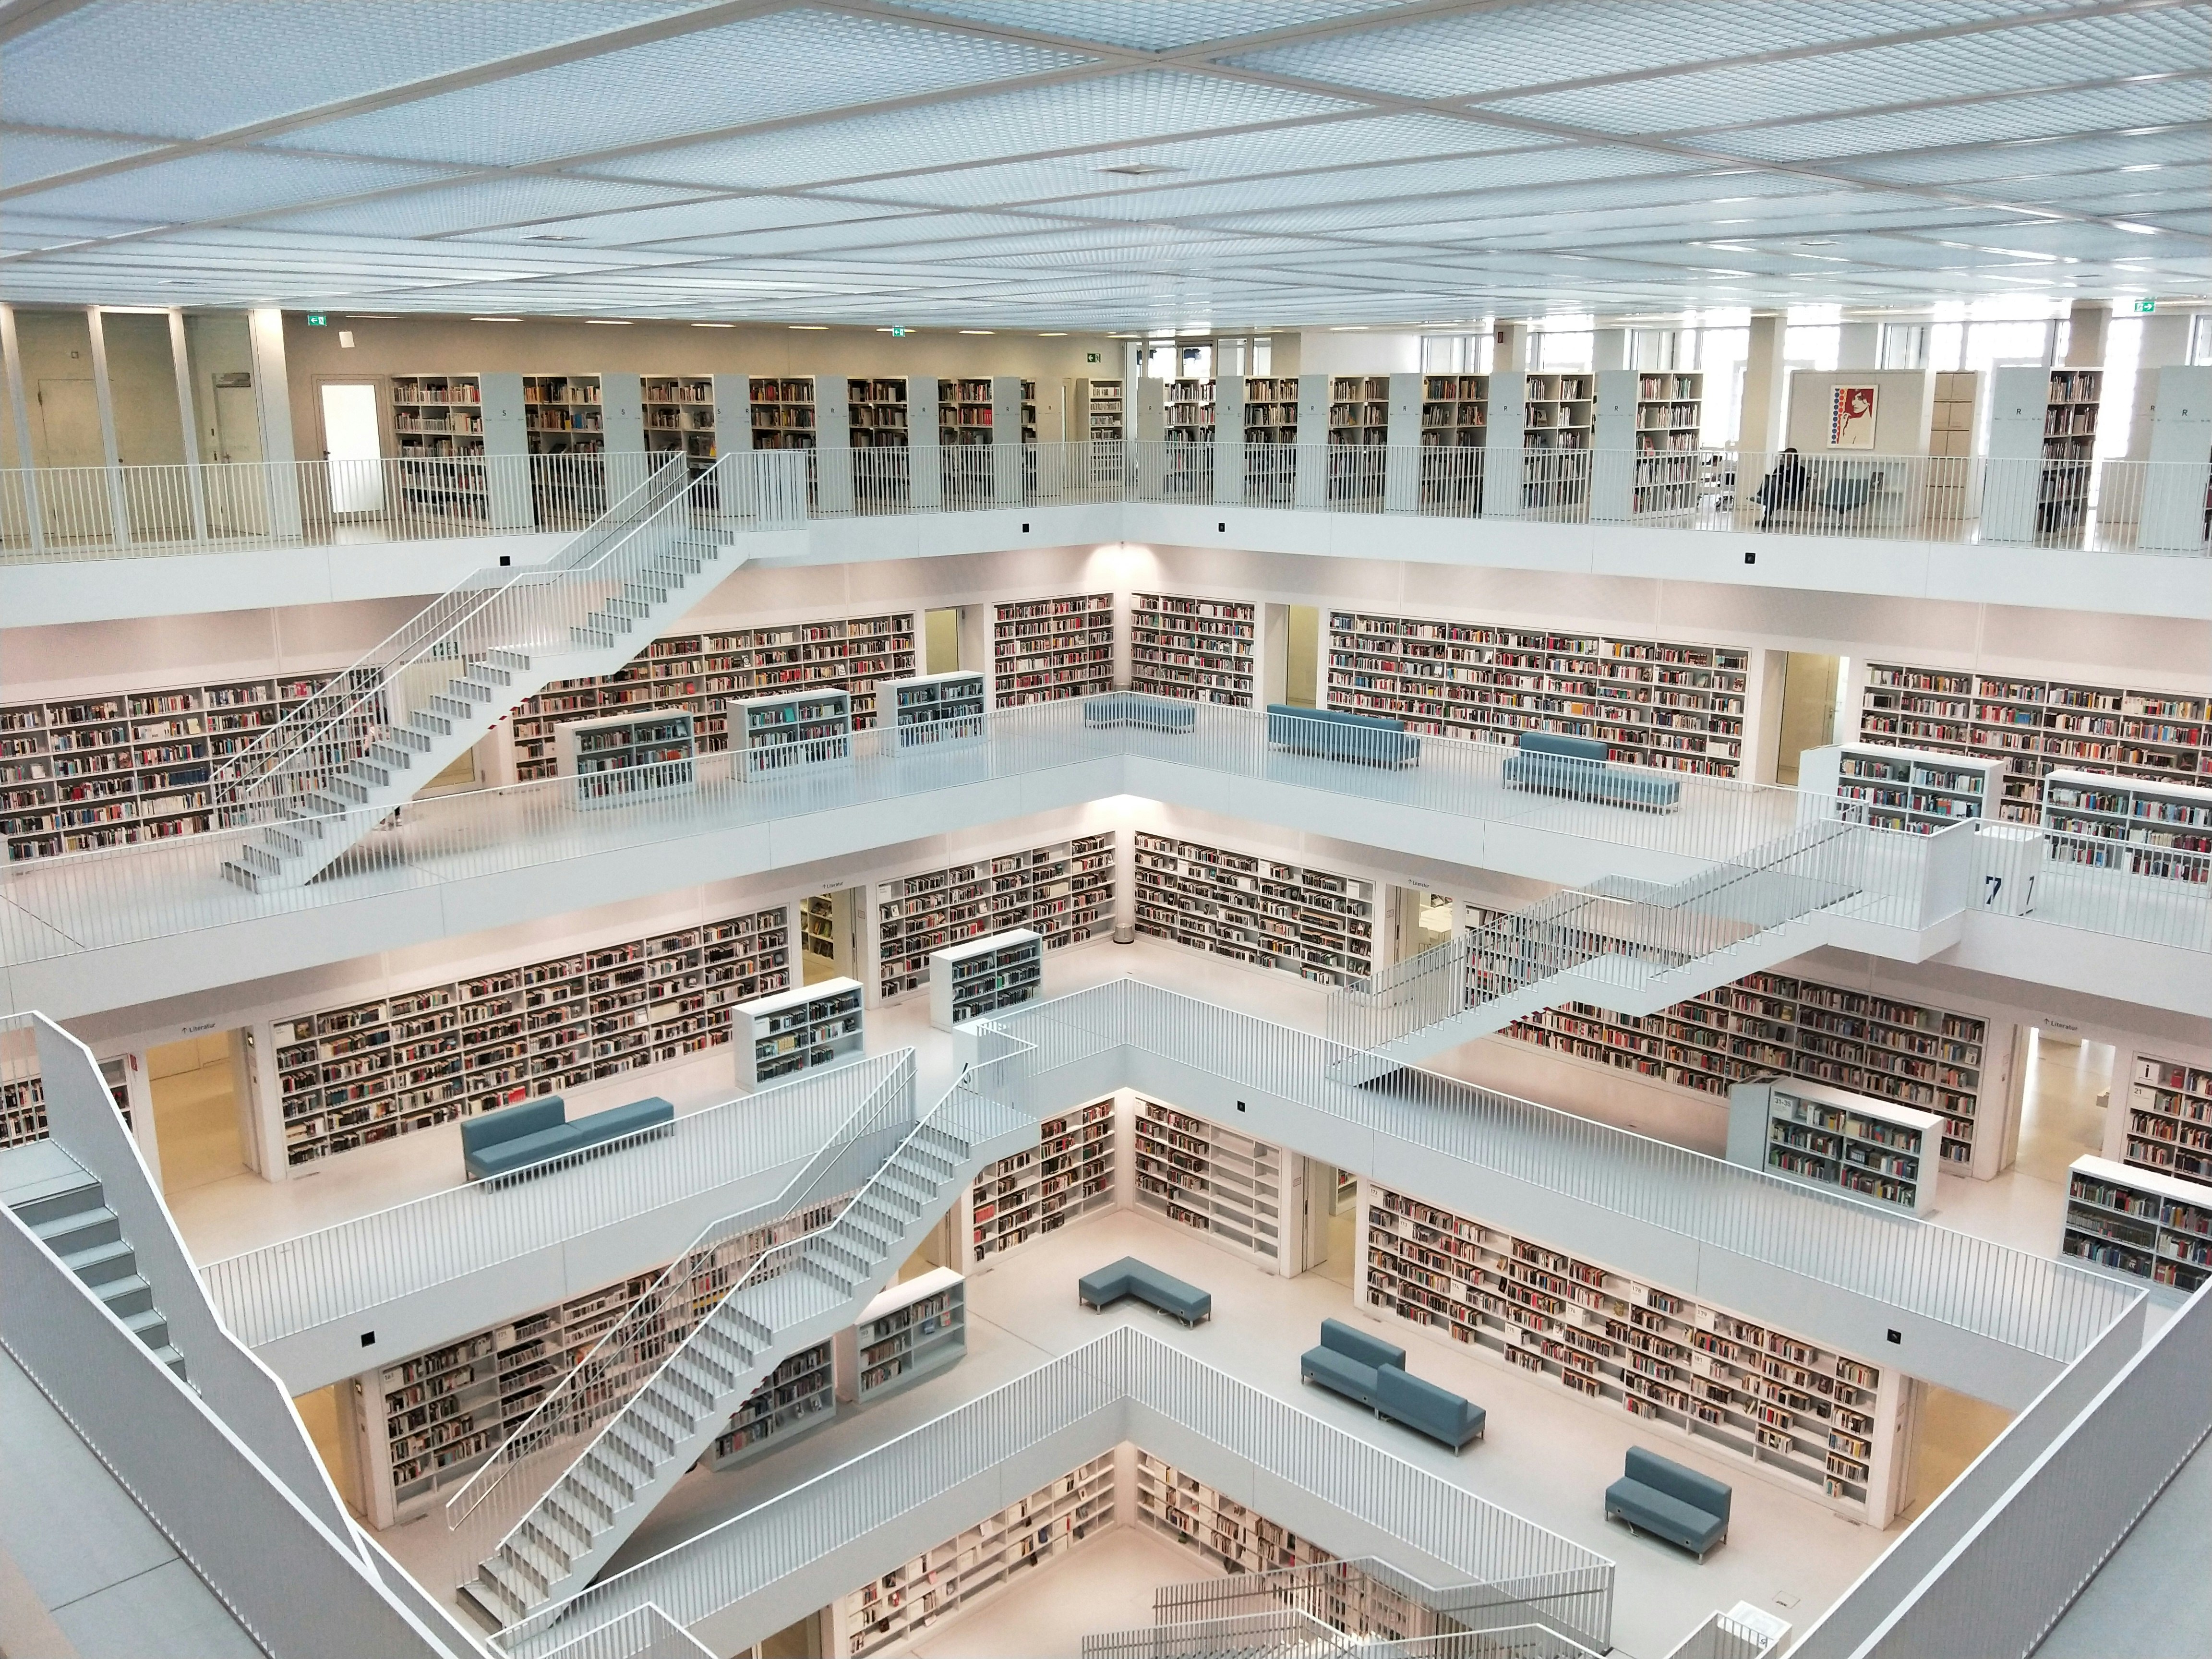 View from an upper gallery down onto a central atrium in a modern public library with glossy white floors, stairs and walls. The walls of each floor are lined floor to ceiling with books, and there are grey sofas and free-standing bookshelves dotted around.